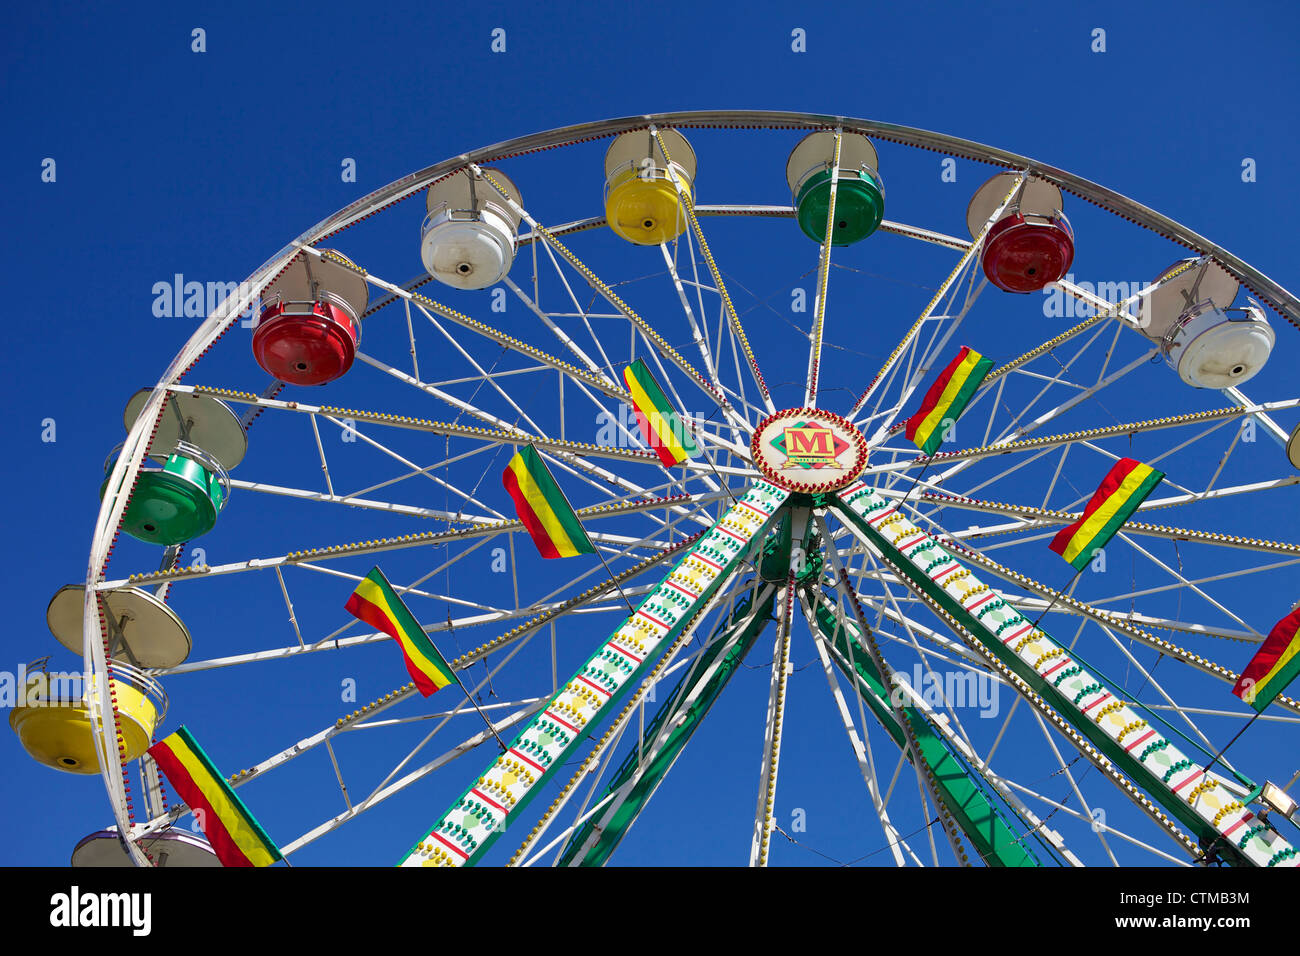 Ferris wheel with colorful carriages with blue sky background Stock Photo